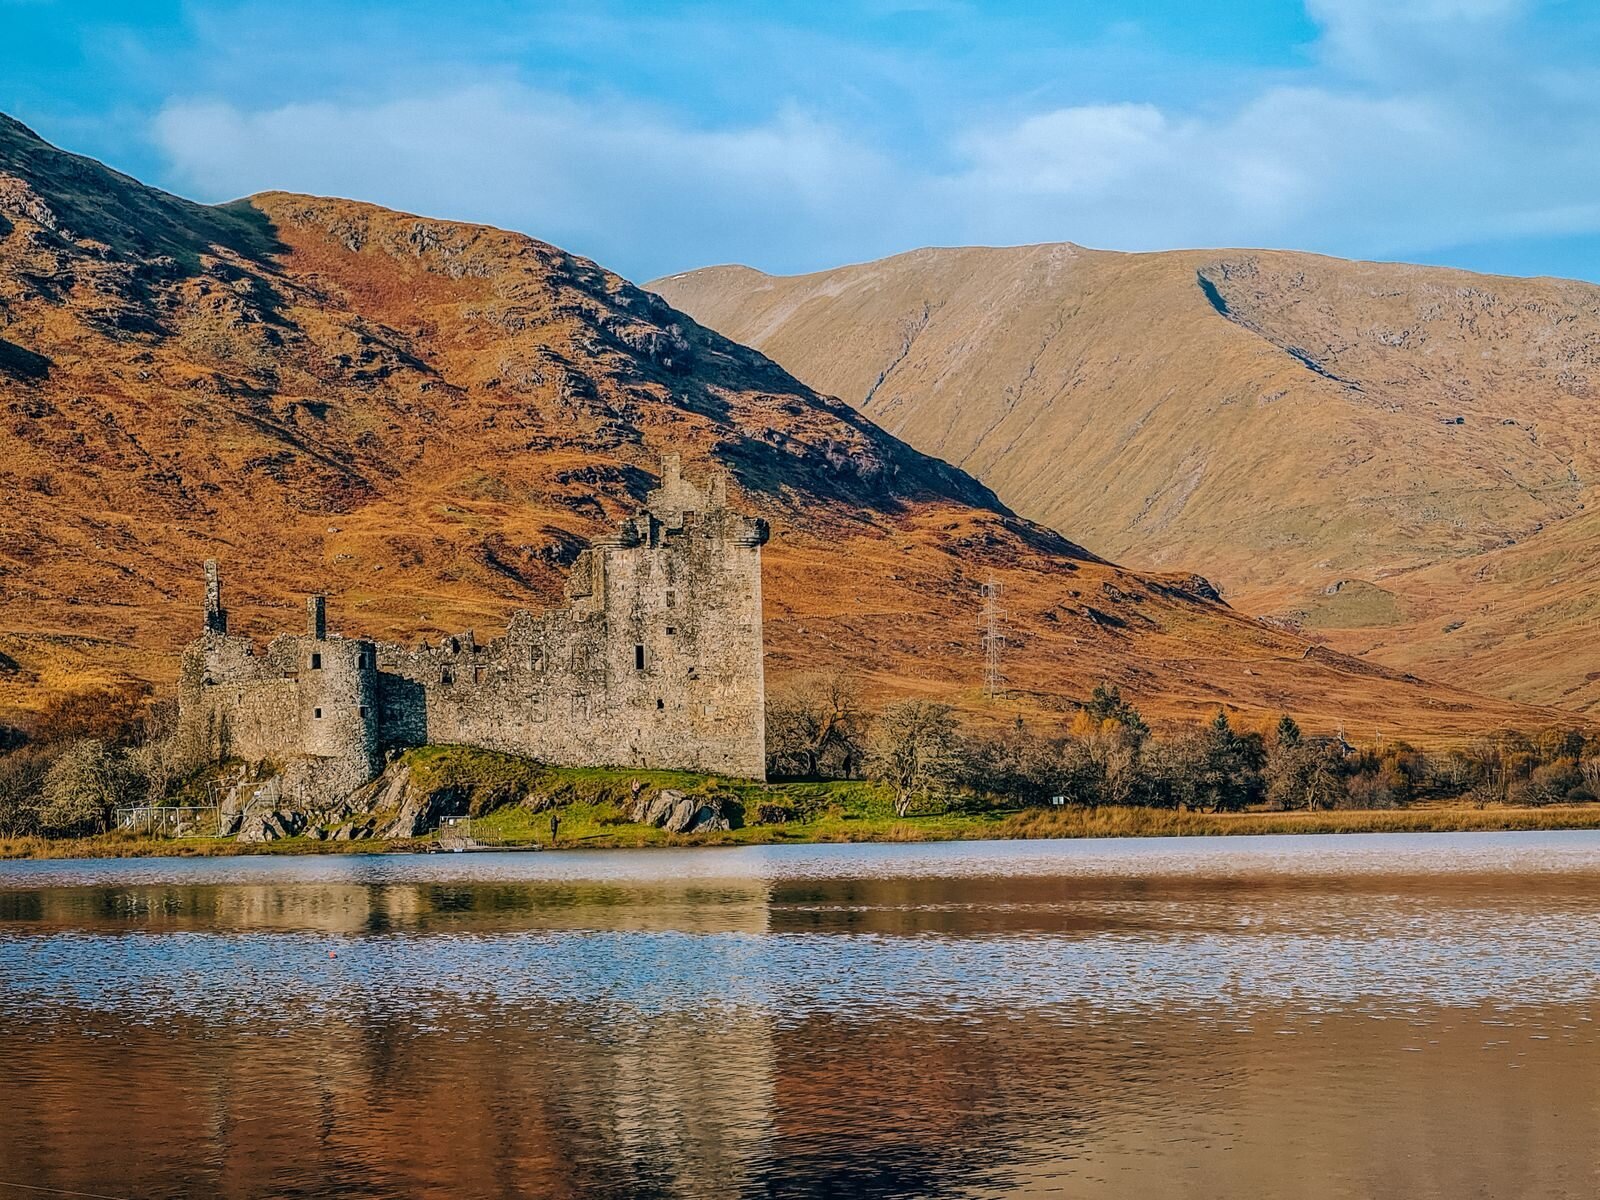 Looking across a lake with the ruins of Kilchurn Castle on the opposite side, backed by mountains